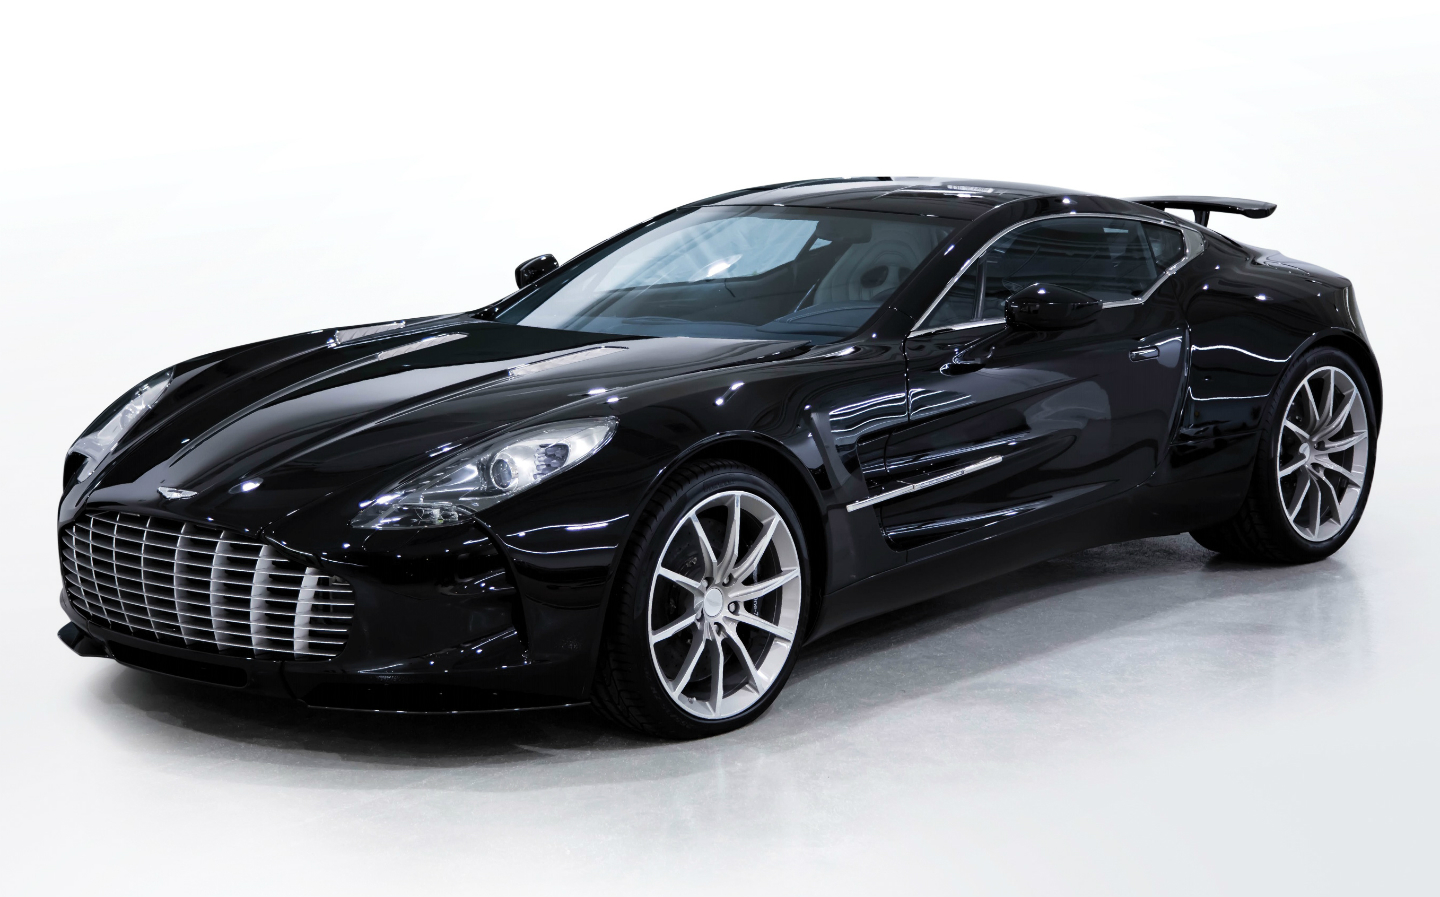 ONE-77 Coupe